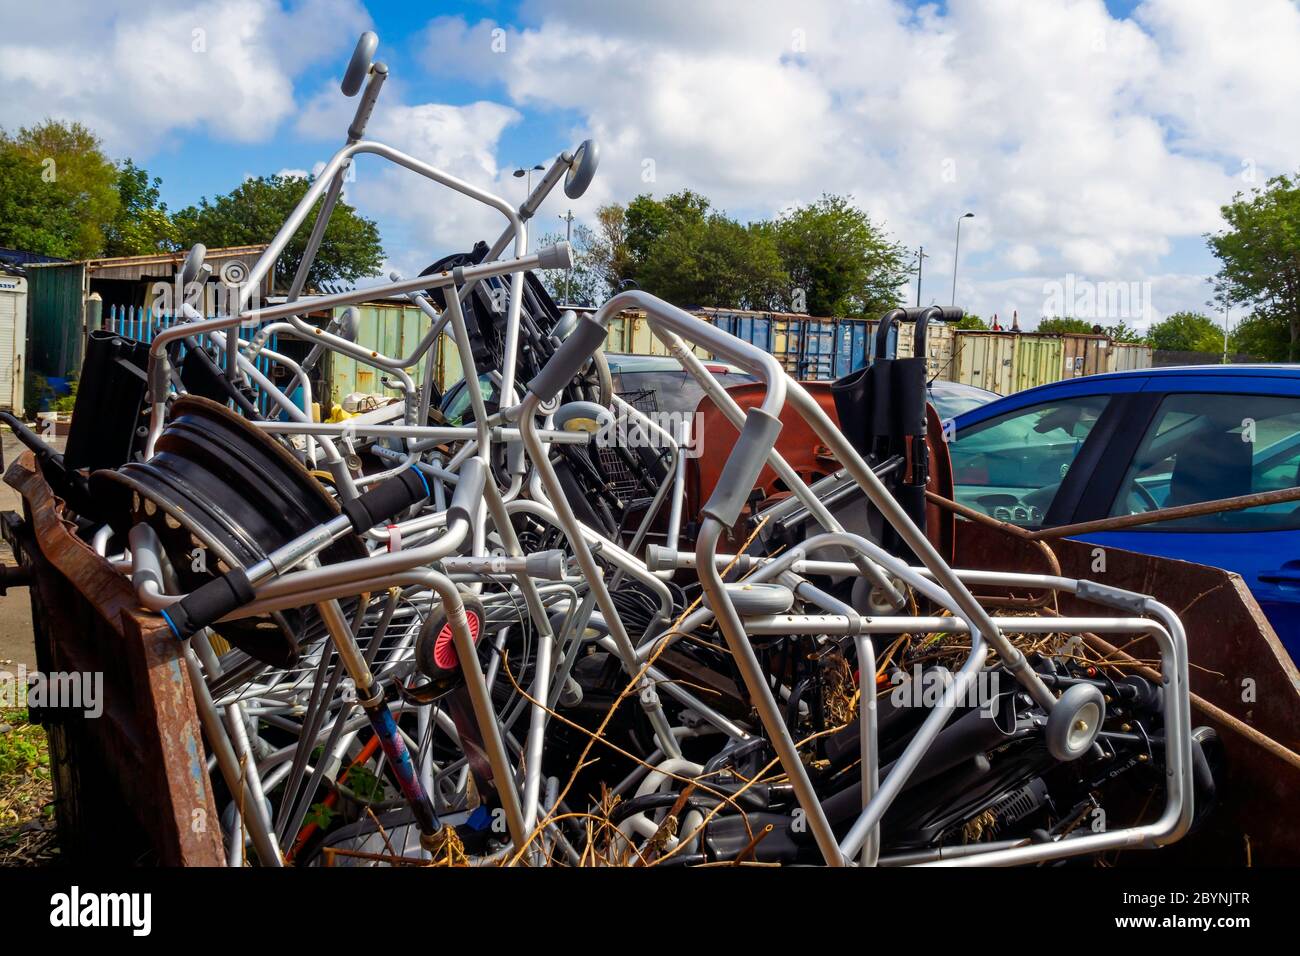 Scrap metal in a skip mainly zimmer frames or personal walking aids for disposal Stock Photo